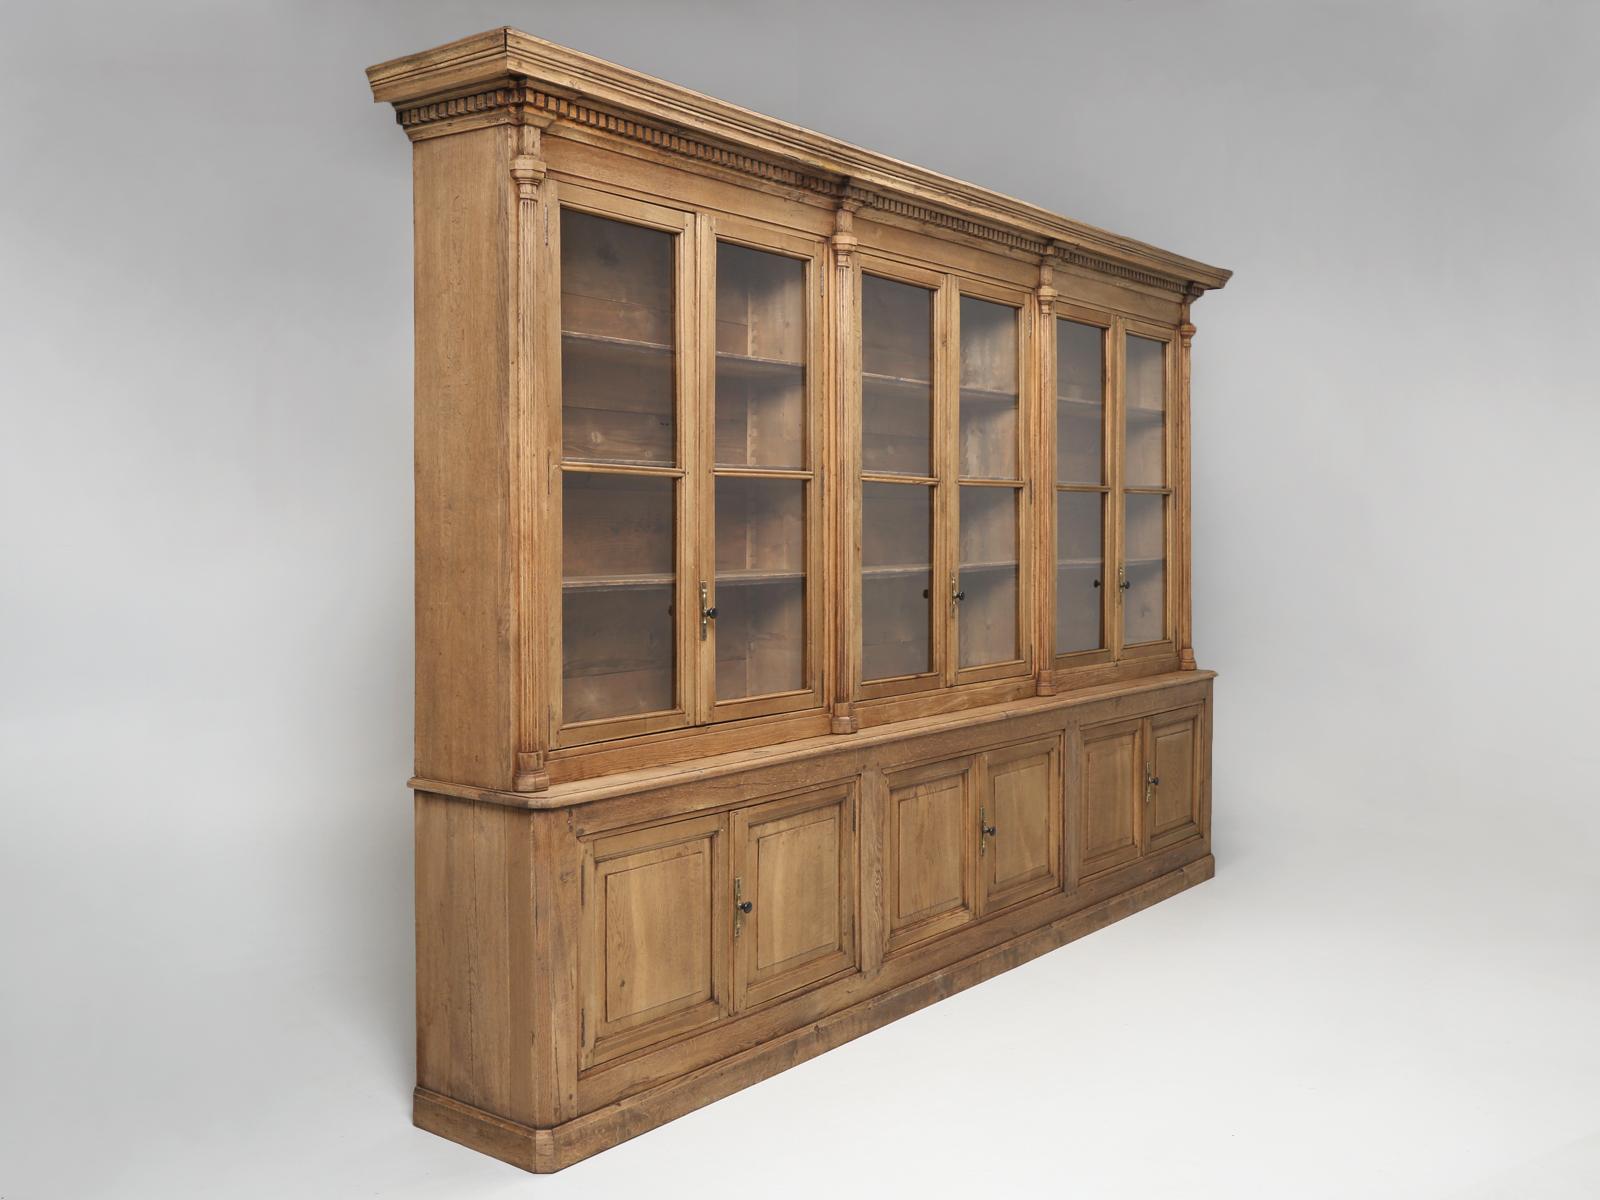 Massive and completely original, unrestored French antique weathered Oak Bookcase, dating from the mid-1800’s. This highly unique antique French Bookcase, might have the most beautiful color oak we have ever seen. This is not some finishers